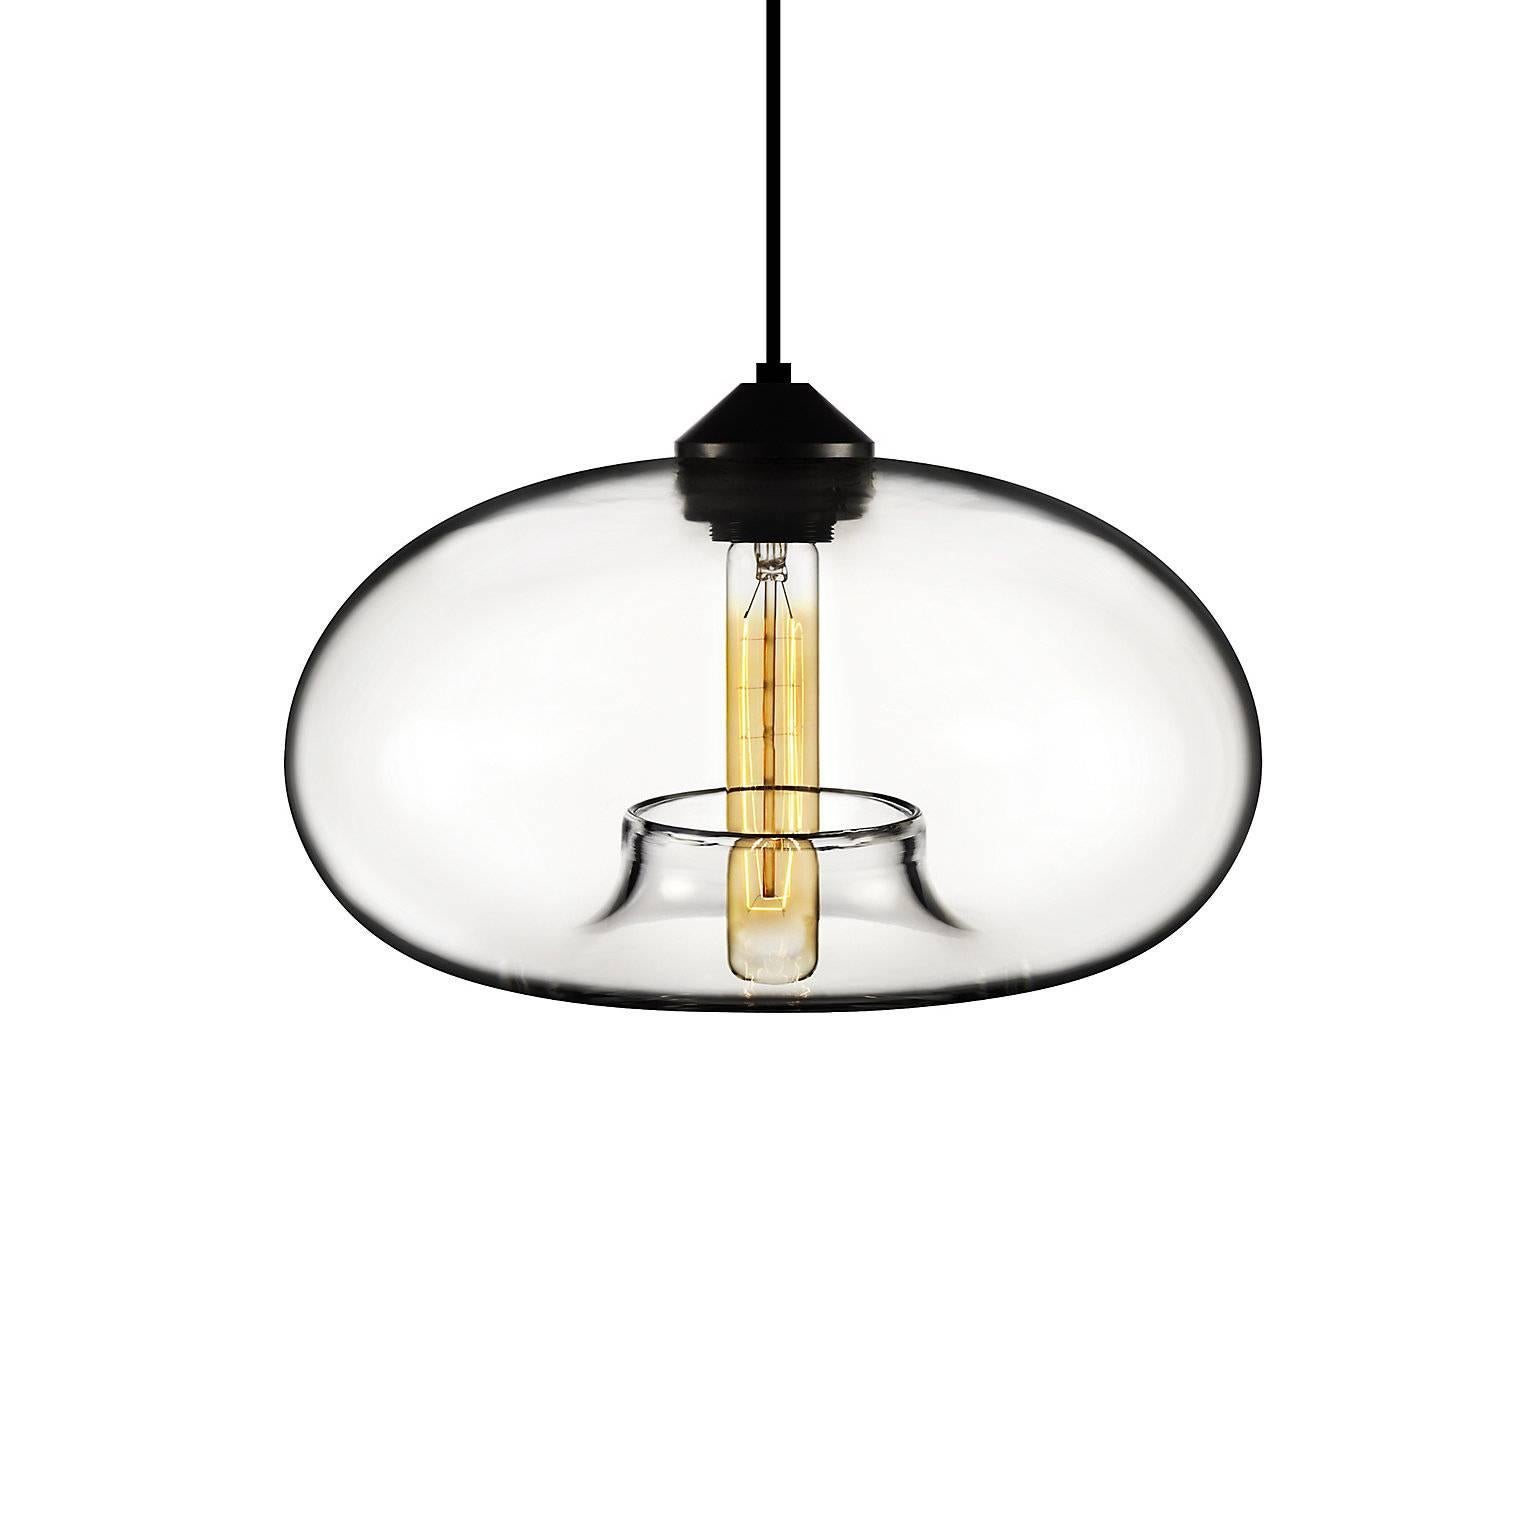 Conjuring the awe of the Northern Lights, the Aurora pendant’s distinctive shape captures the craftsmanship and artistry of handblown glass. Every single glass pendant light that comes from Niche is handblown by real human beings in a